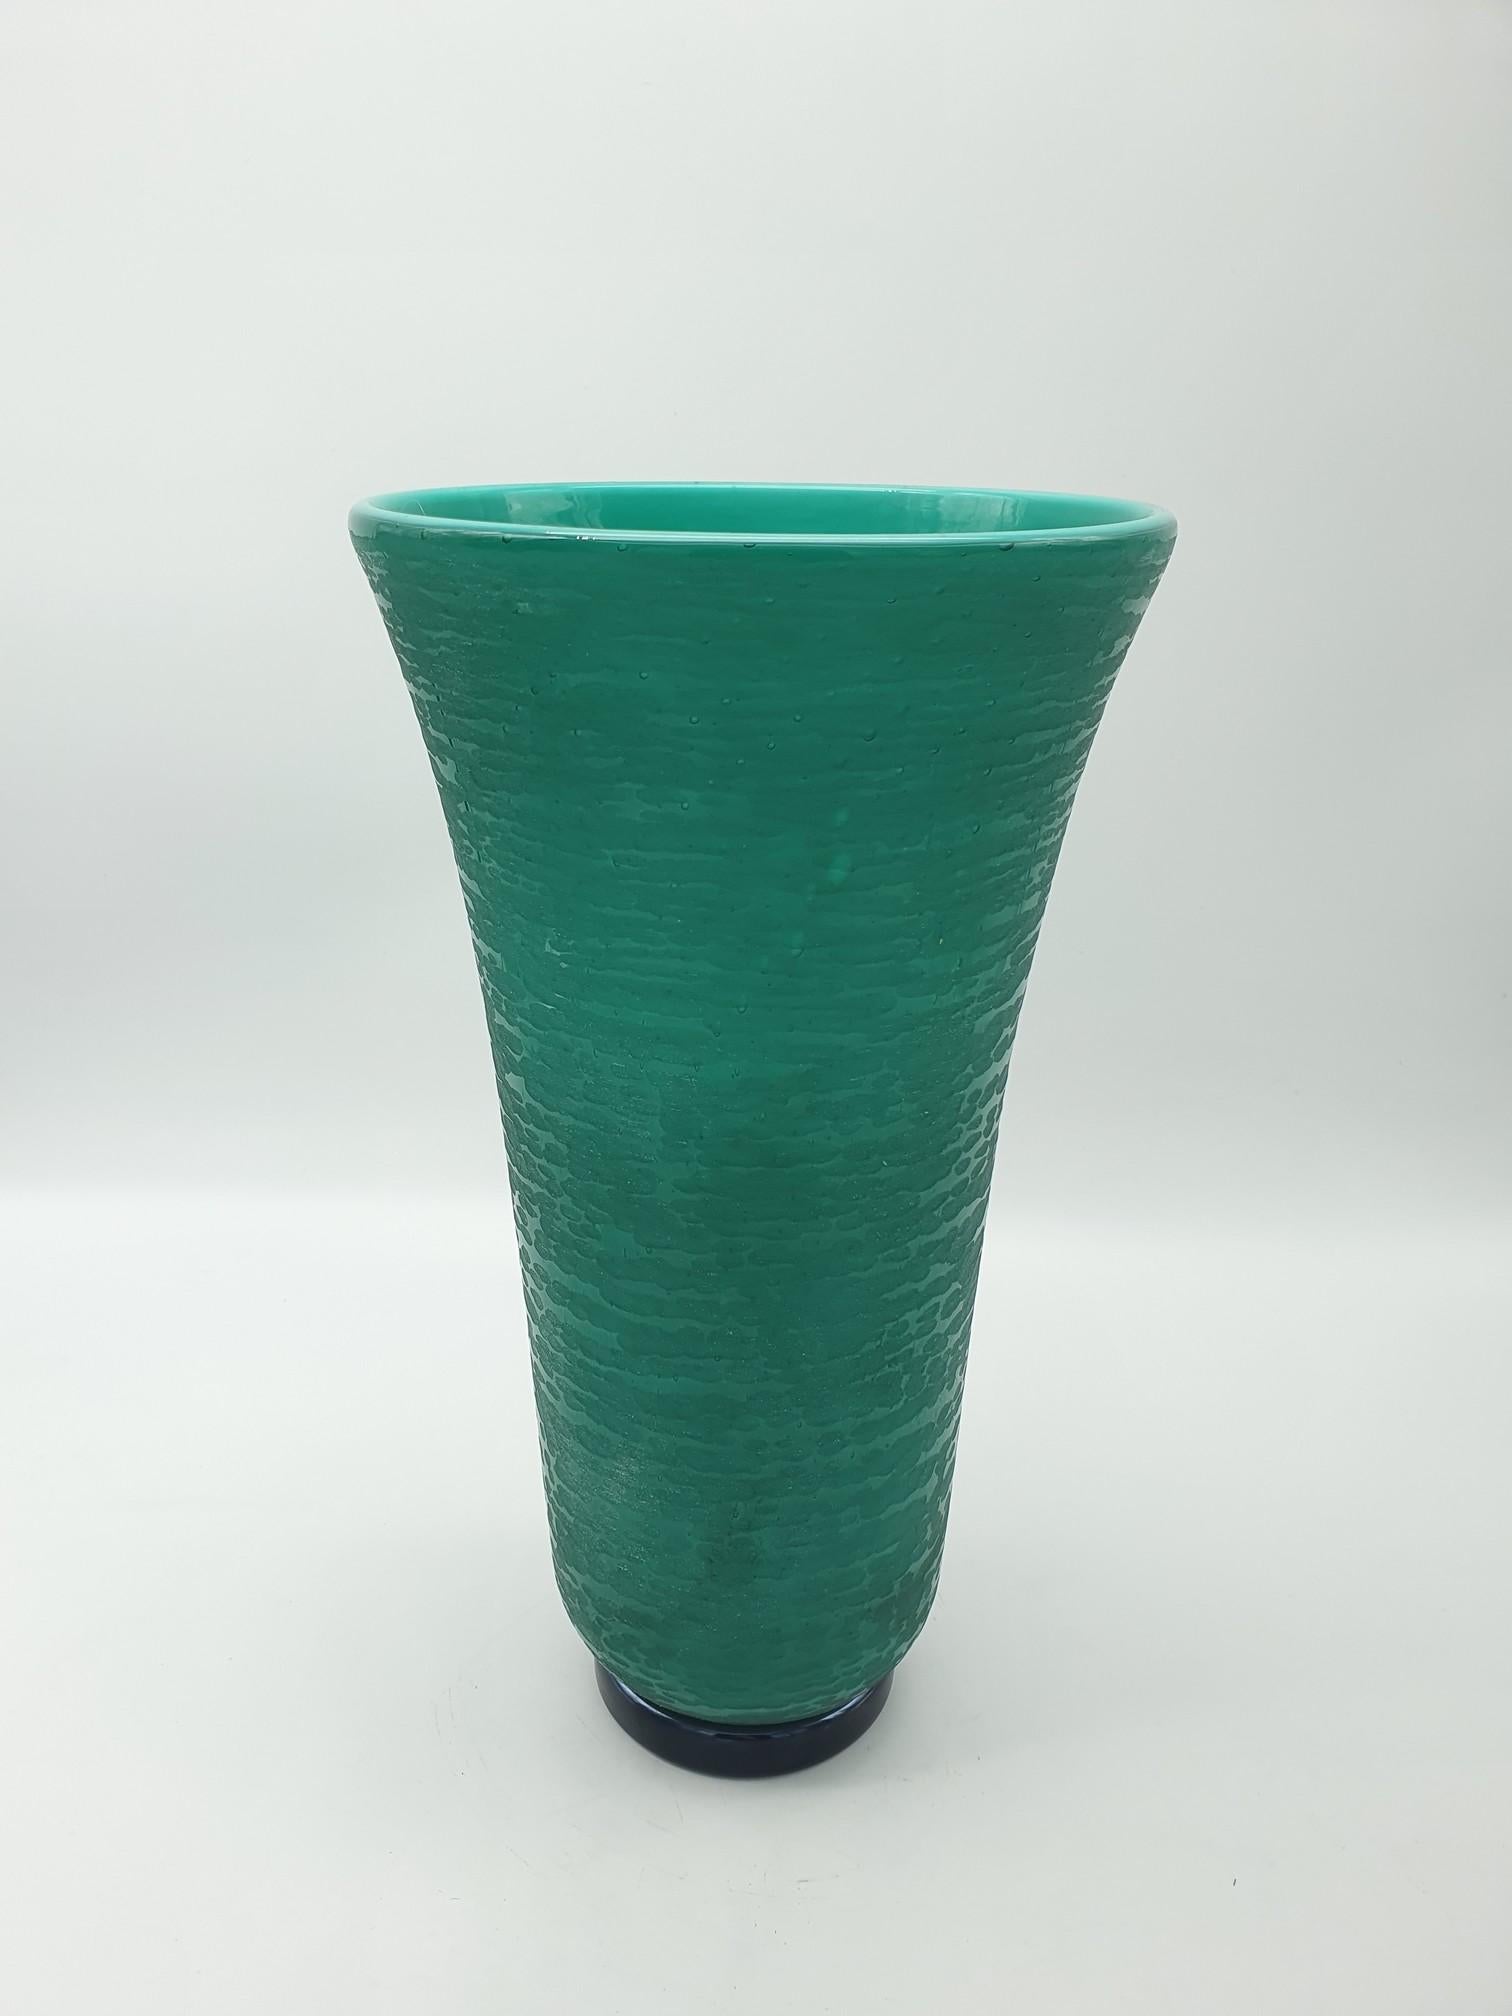 Italian Modern Murano Glass Vase Centerpiece in Dark Green Color by Cenedese, Early 1990 For Sale